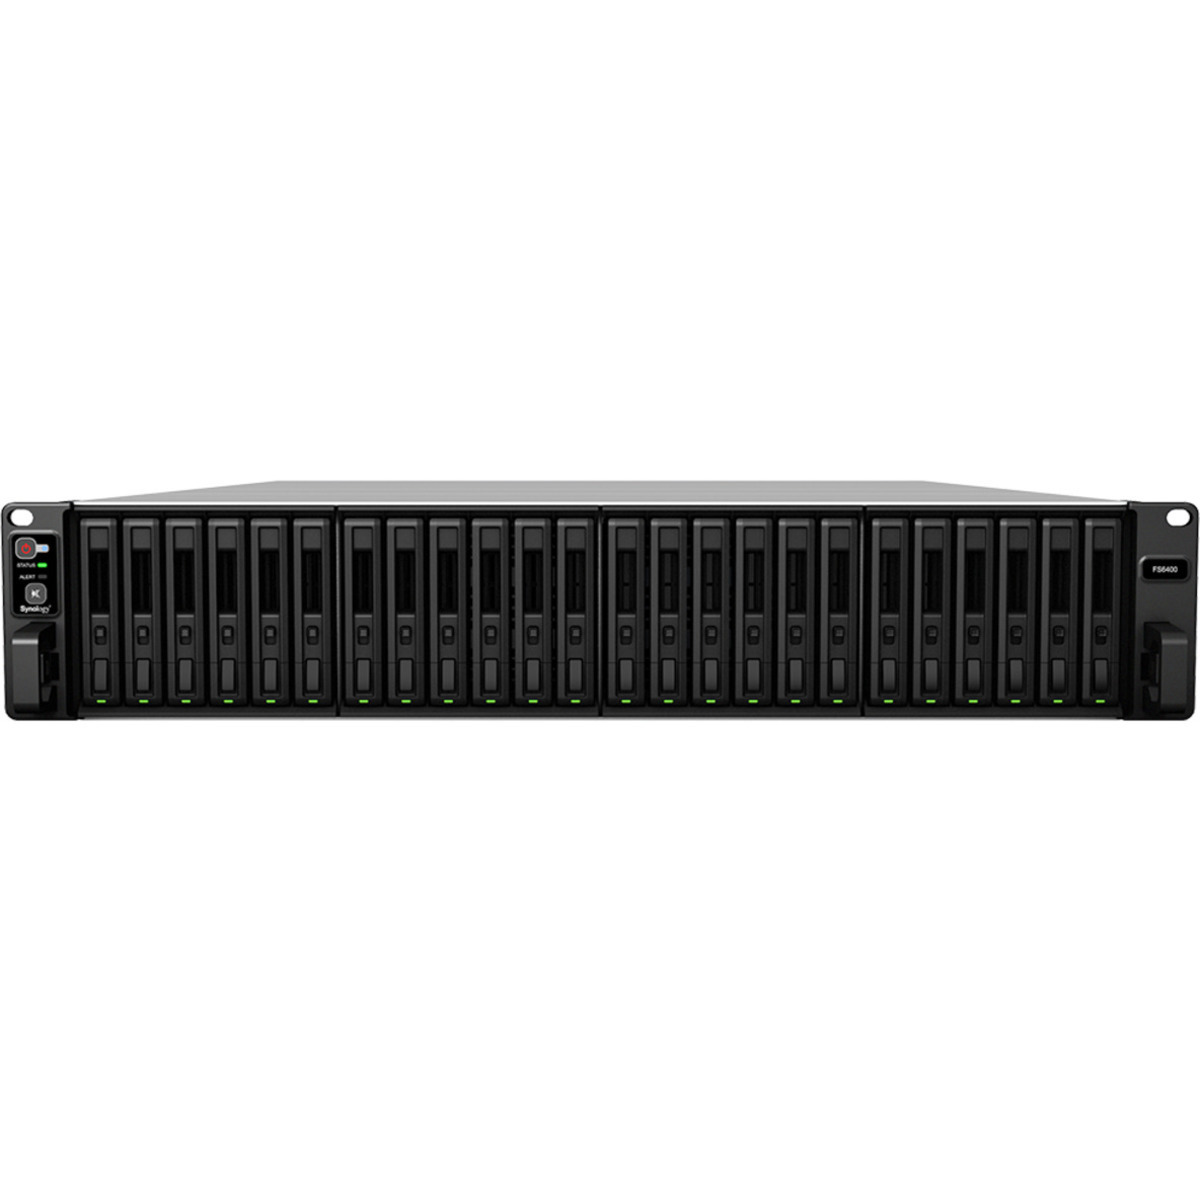 Synology FlashStation FS6400 11.5tb 24-Bay RackMount Large Business / Enterprise NAS - Network Attached Storage Device 23x500gb Samsung 870 EVO MZ-77E500BAM 2.5 560/530MB/s SATA 6Gb/s SSD CONSUMER Class Drives Installed - Burn-In Tested FlashStation FS6400